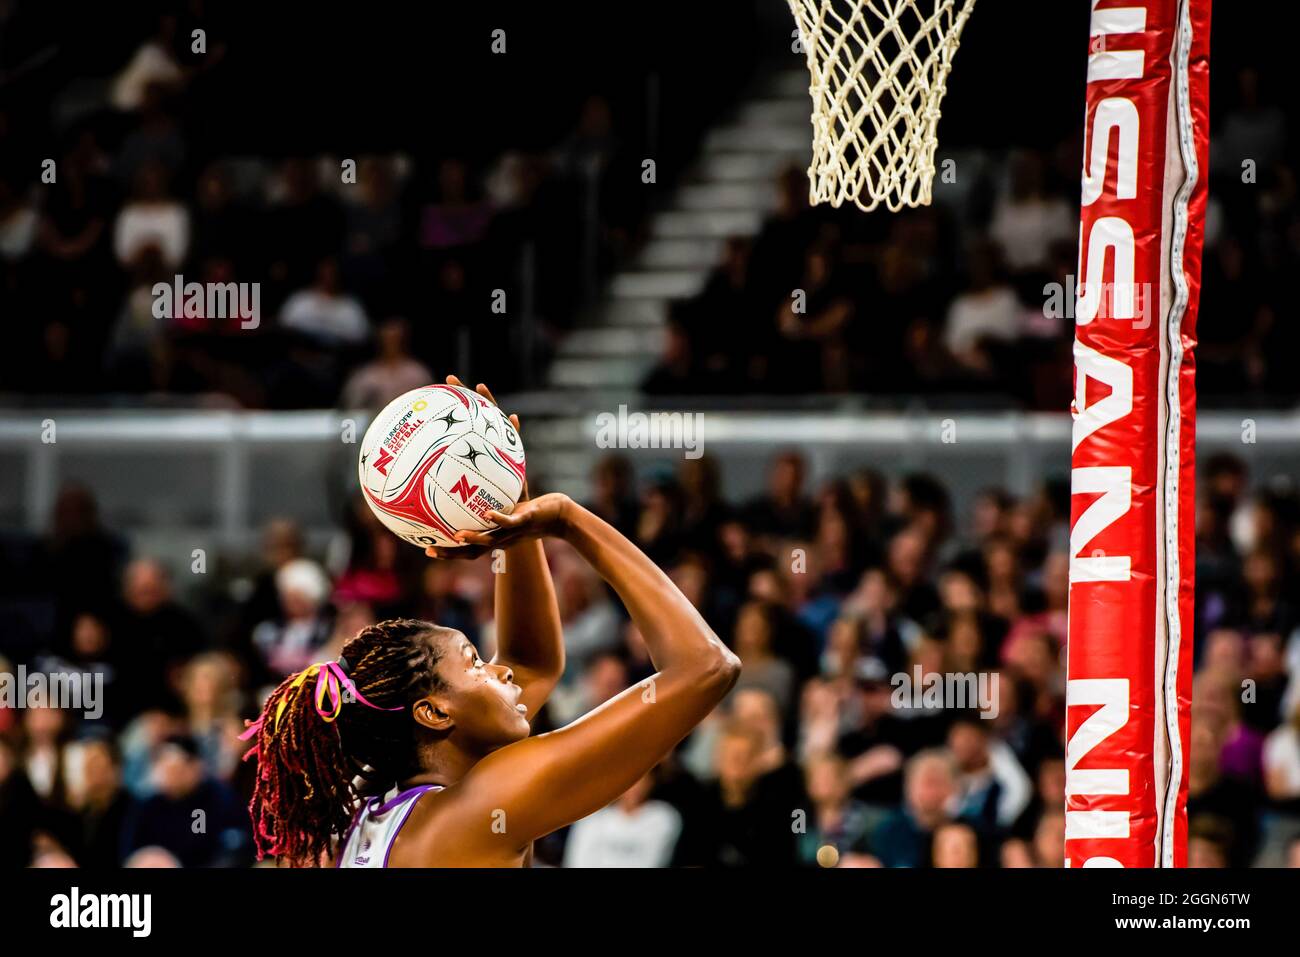 Romelda Aiken taking a goal shot for Queensland Firebirds, during the Suncorp Super Netball 2019 Season Game 1 between Melbourne Vixens and Queensland Firebirds at Melbourne Arena, Melbourne Olympic Park.  Vixens won this home match with the score 73 - 61. (Photo by Alexander Bogatyrev / SOPA Image/Sipa USA) Stock Photo